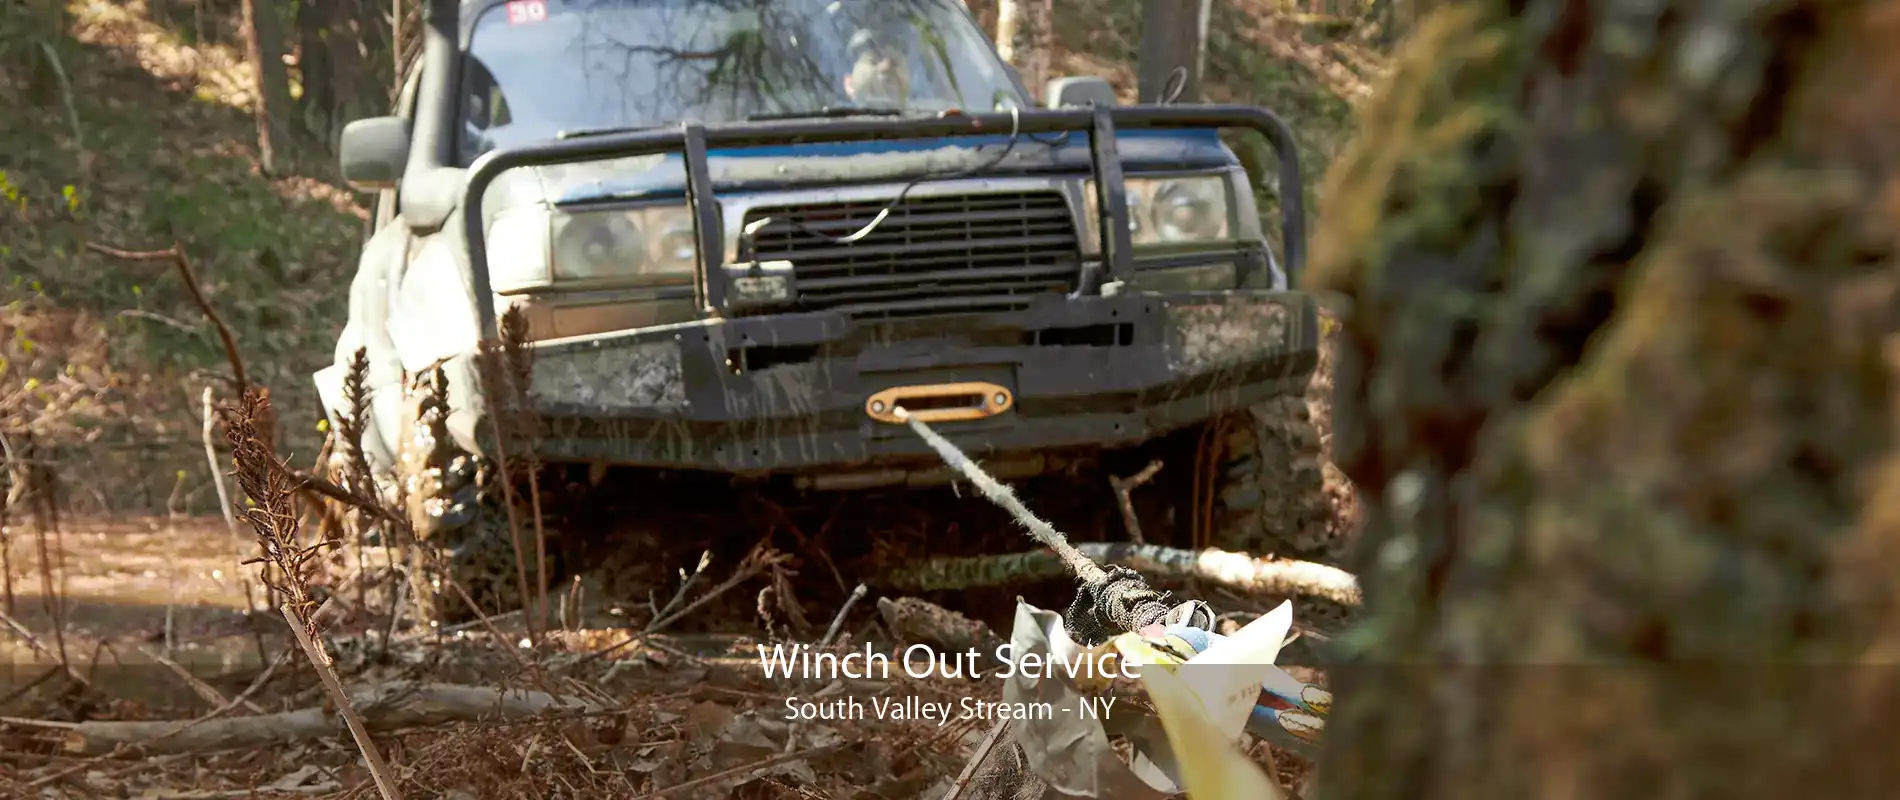 Winch Out Service South Valley Stream - NY